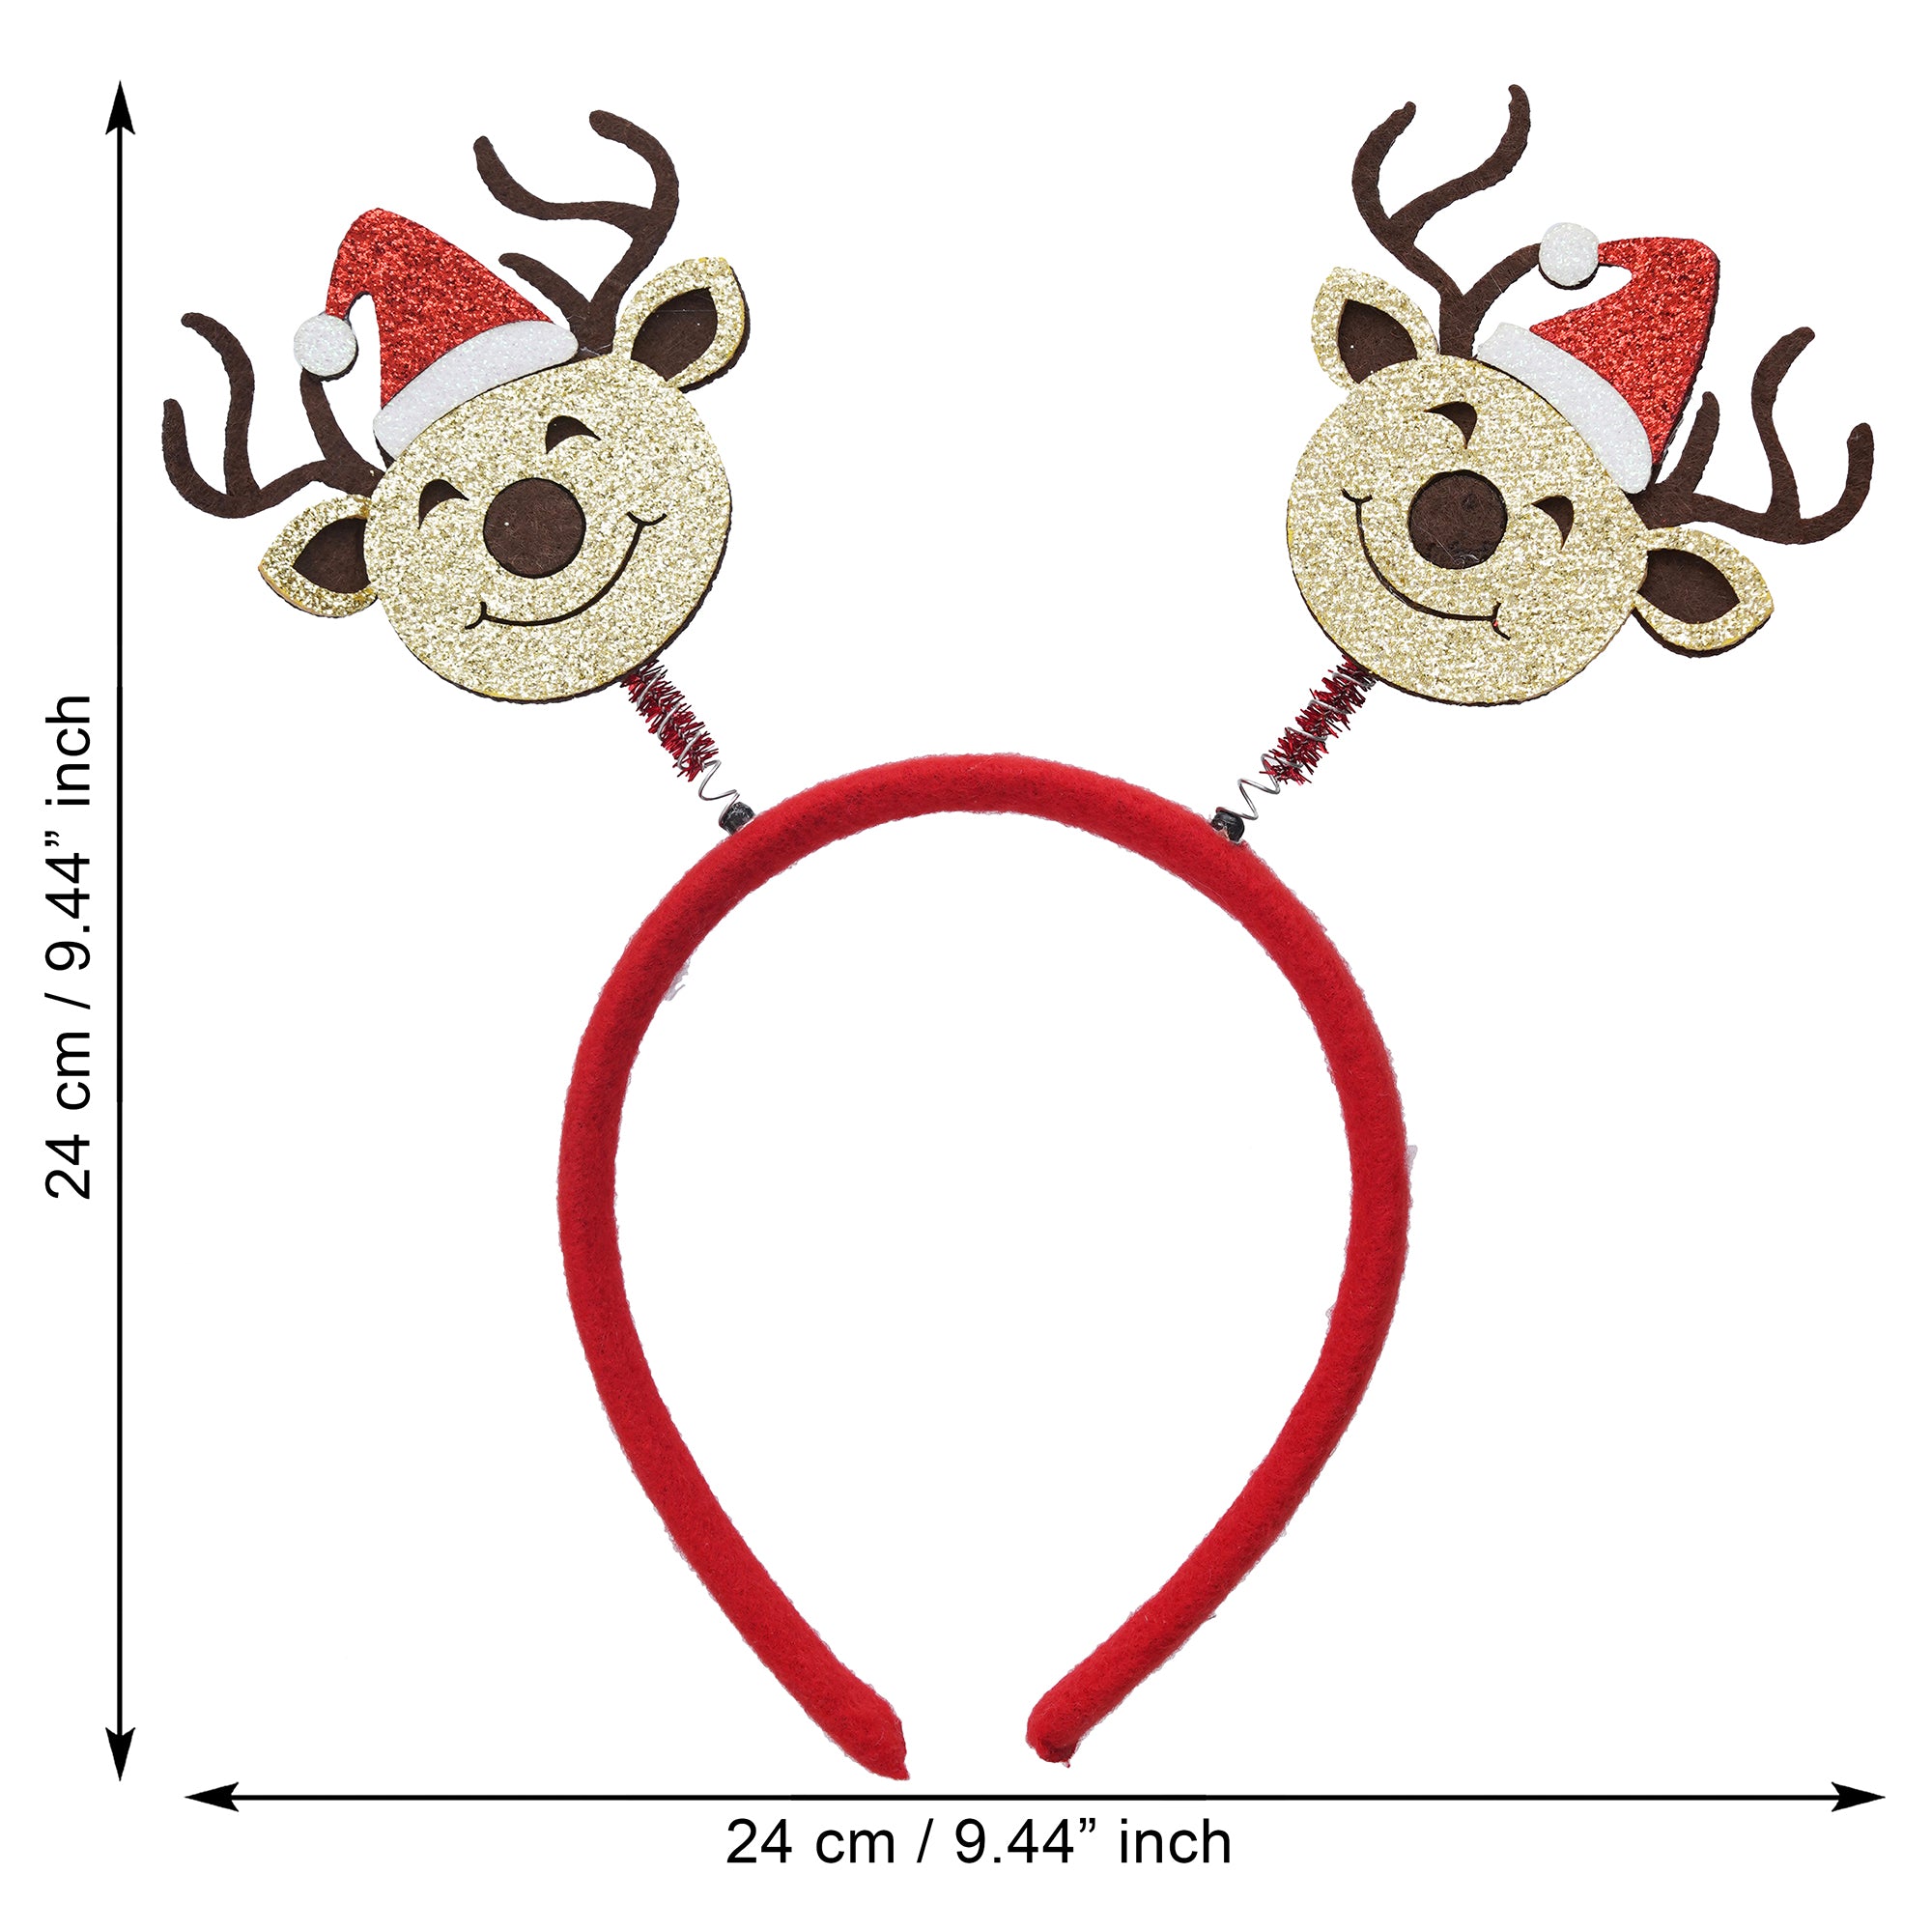 eCraftIndia Christmas Reindeer Design Headband for Christmas and Birthday Parties  Best Gift for Women, Girls, and Kids 3